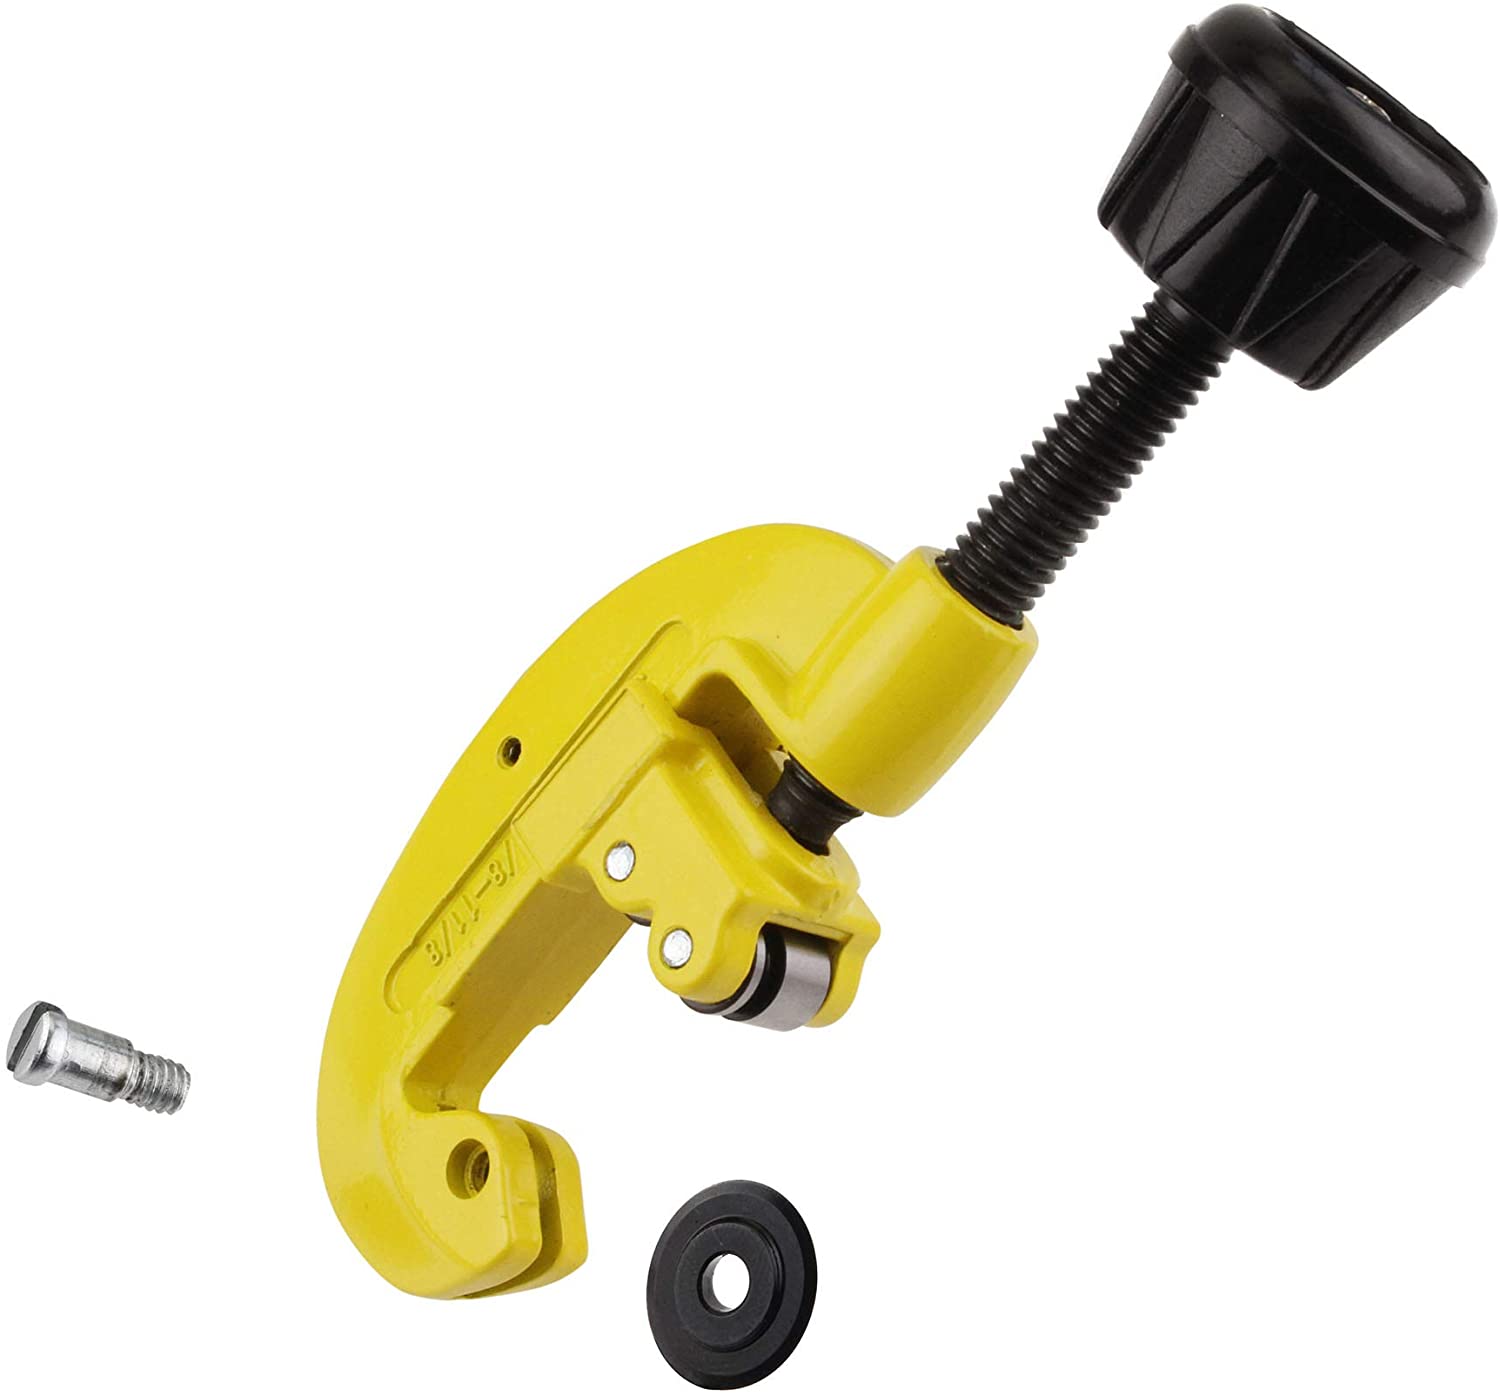 Adjustable pipe cutter 3-30mm Stanley - 1